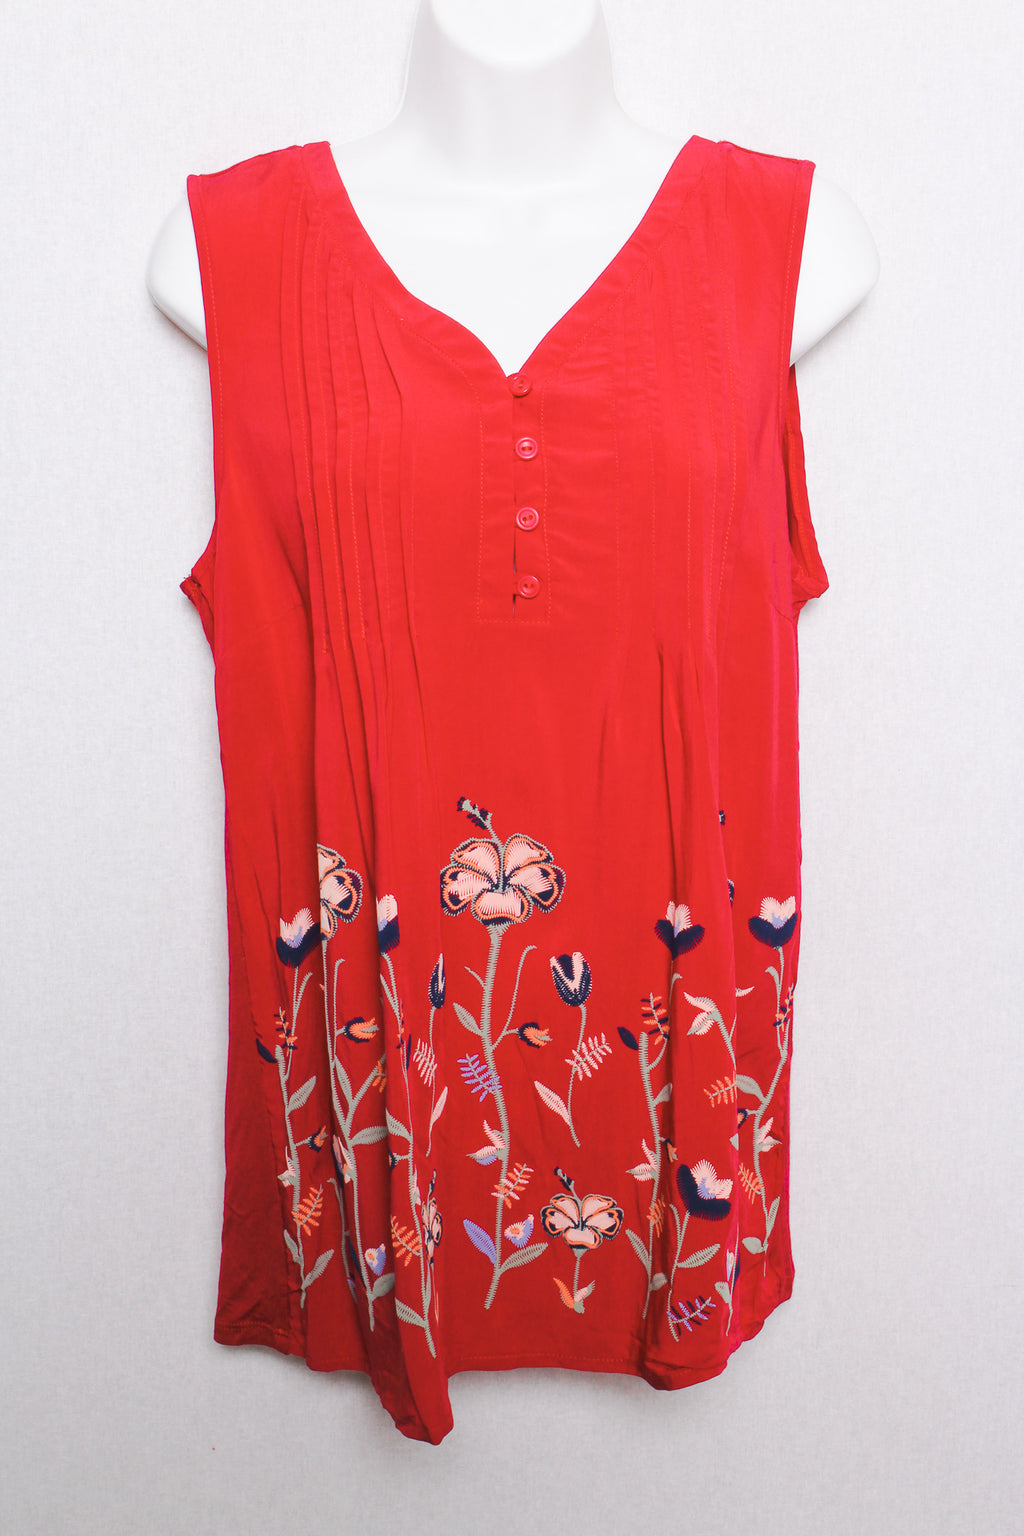 Women's Sleeveless Embroidered Floral Tank Top